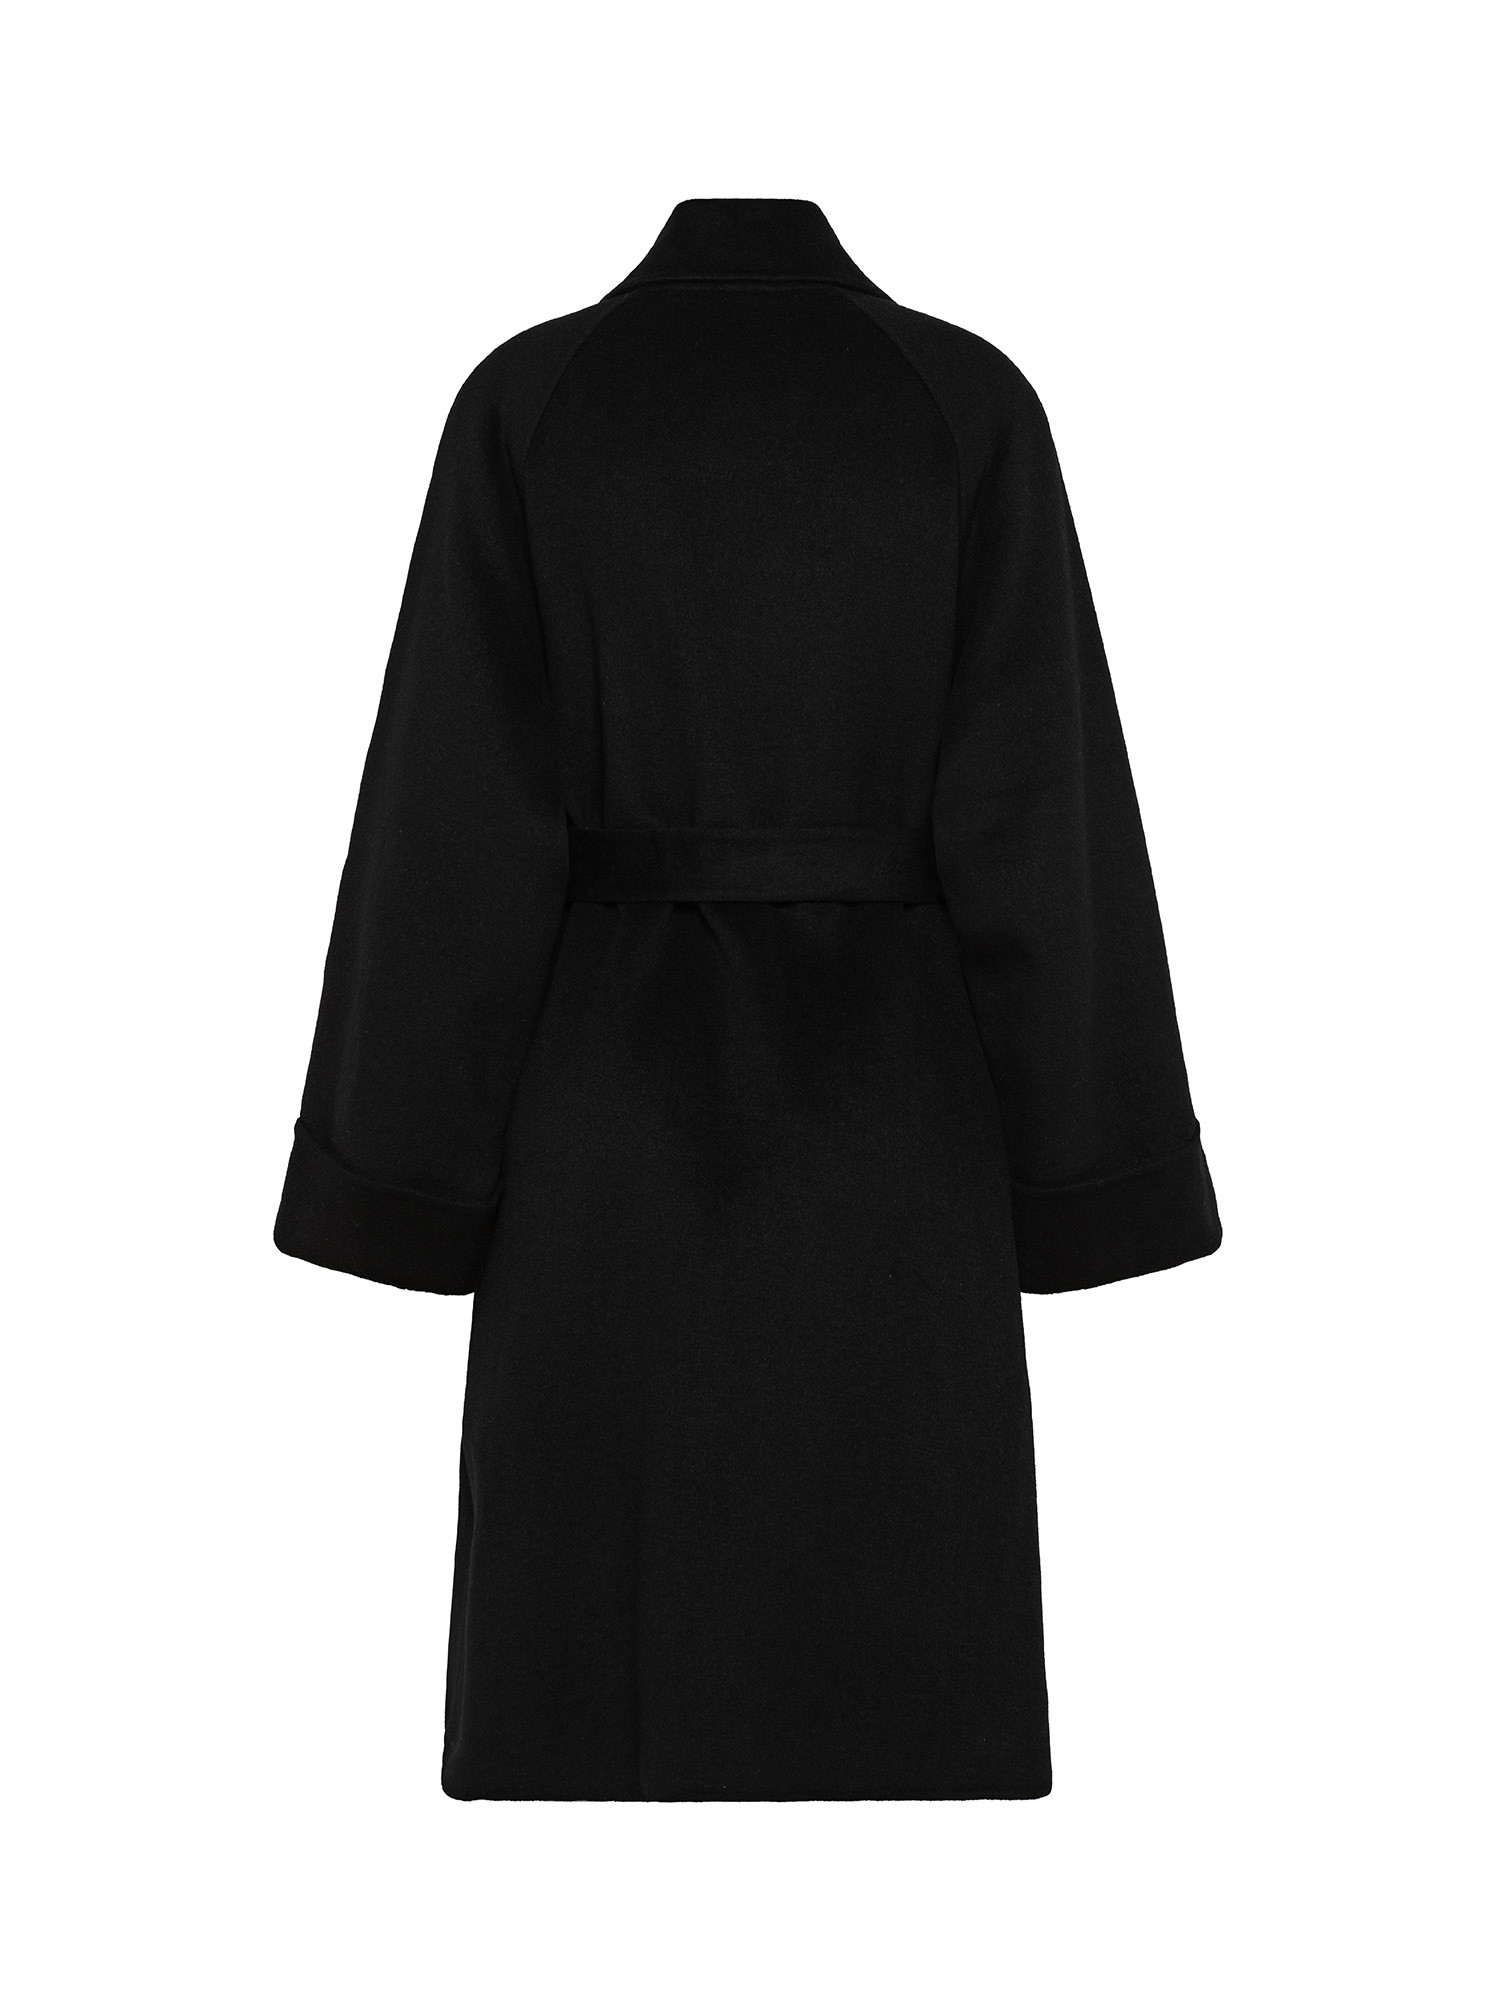 Double single-breasted coat sewn by hand, Black, large image number 1